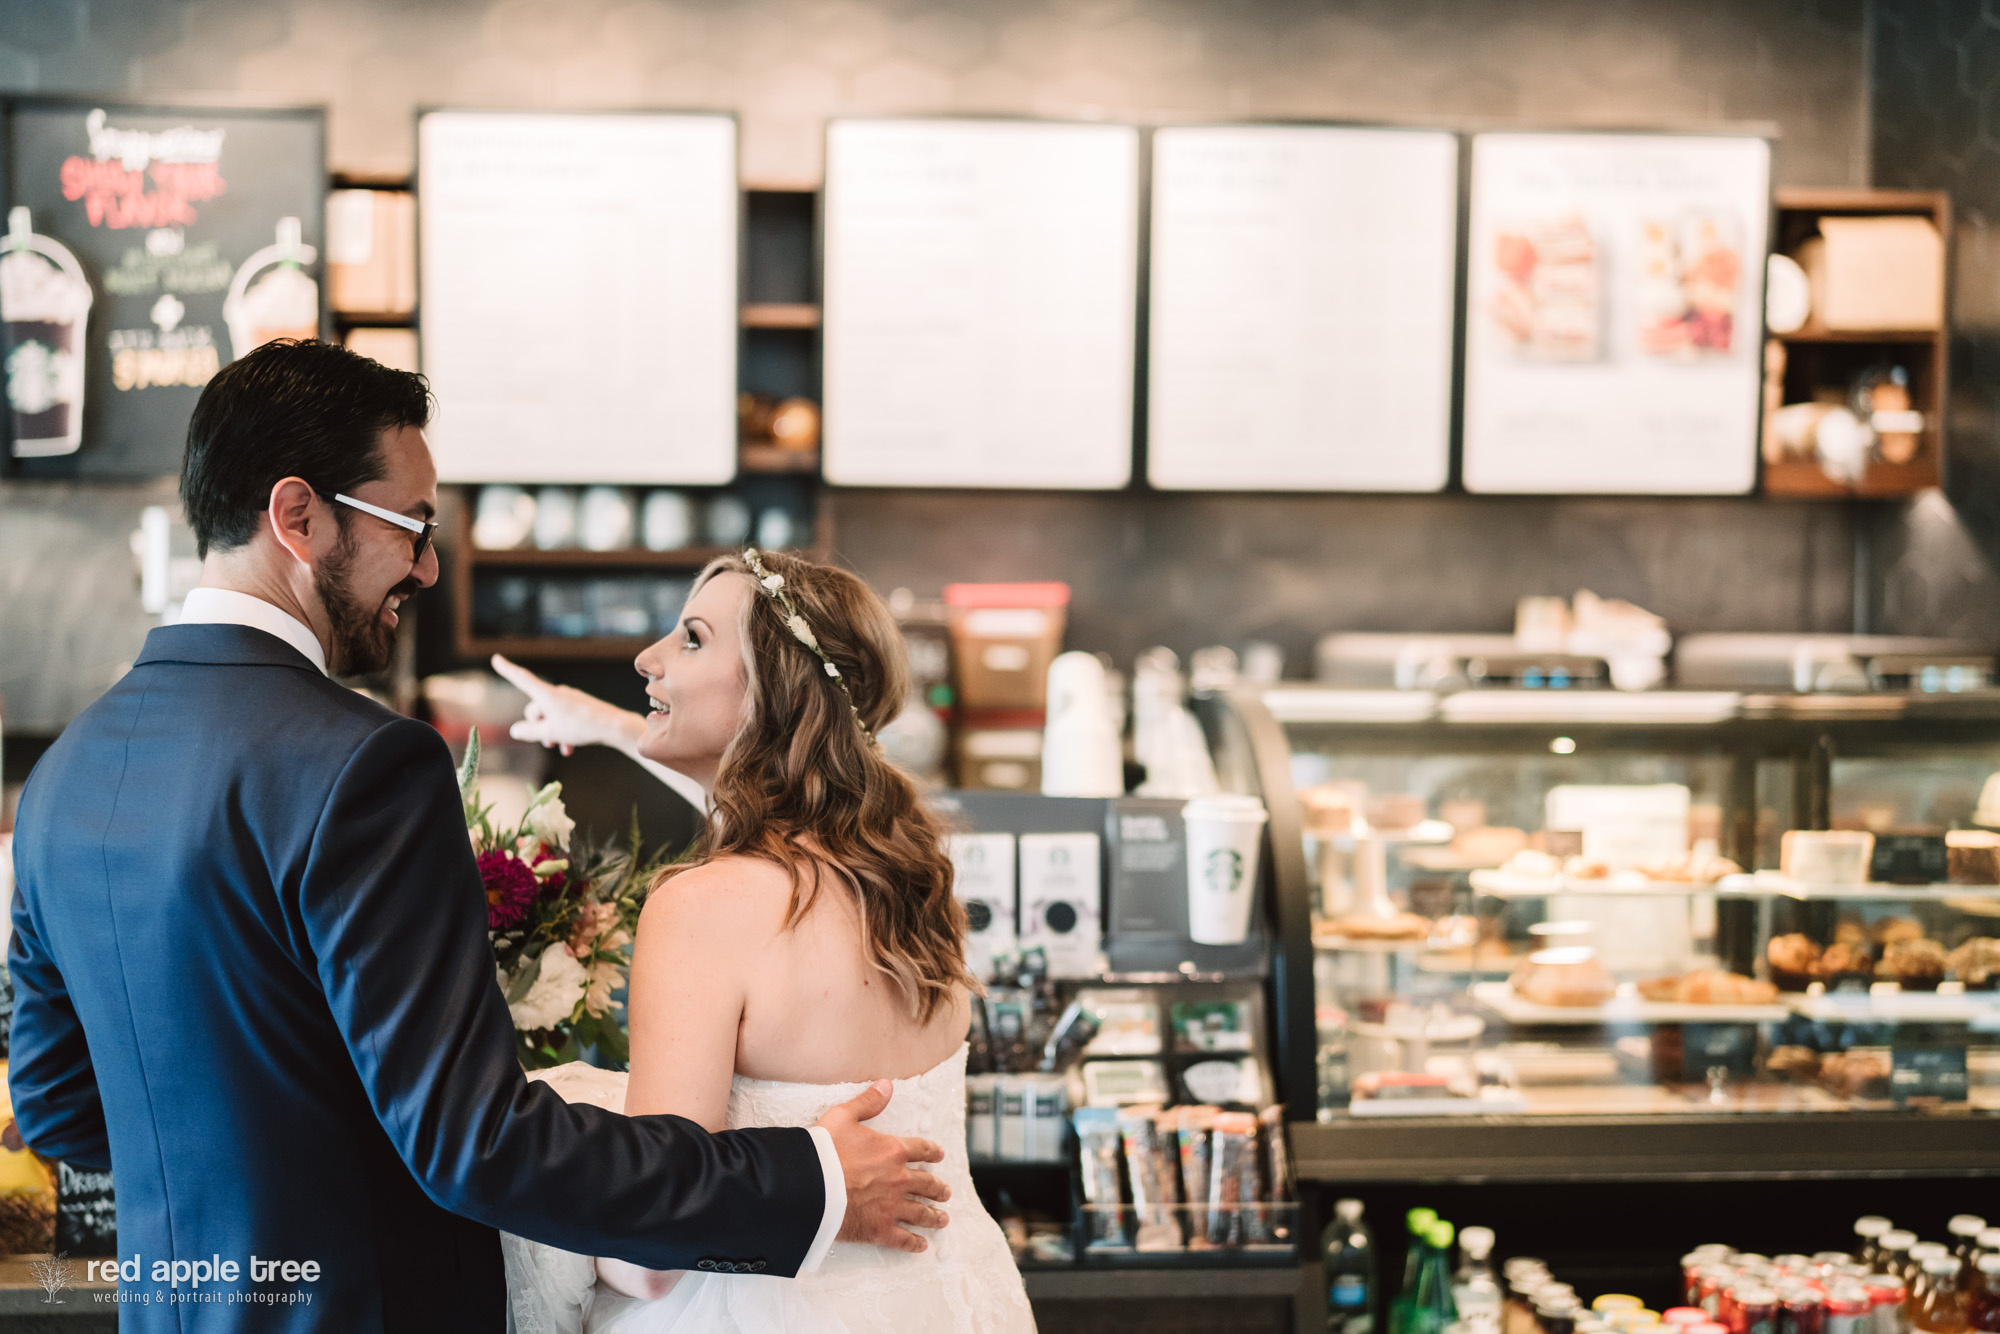  What's a complete wedding day without a quick stop by Starbucks?!? 